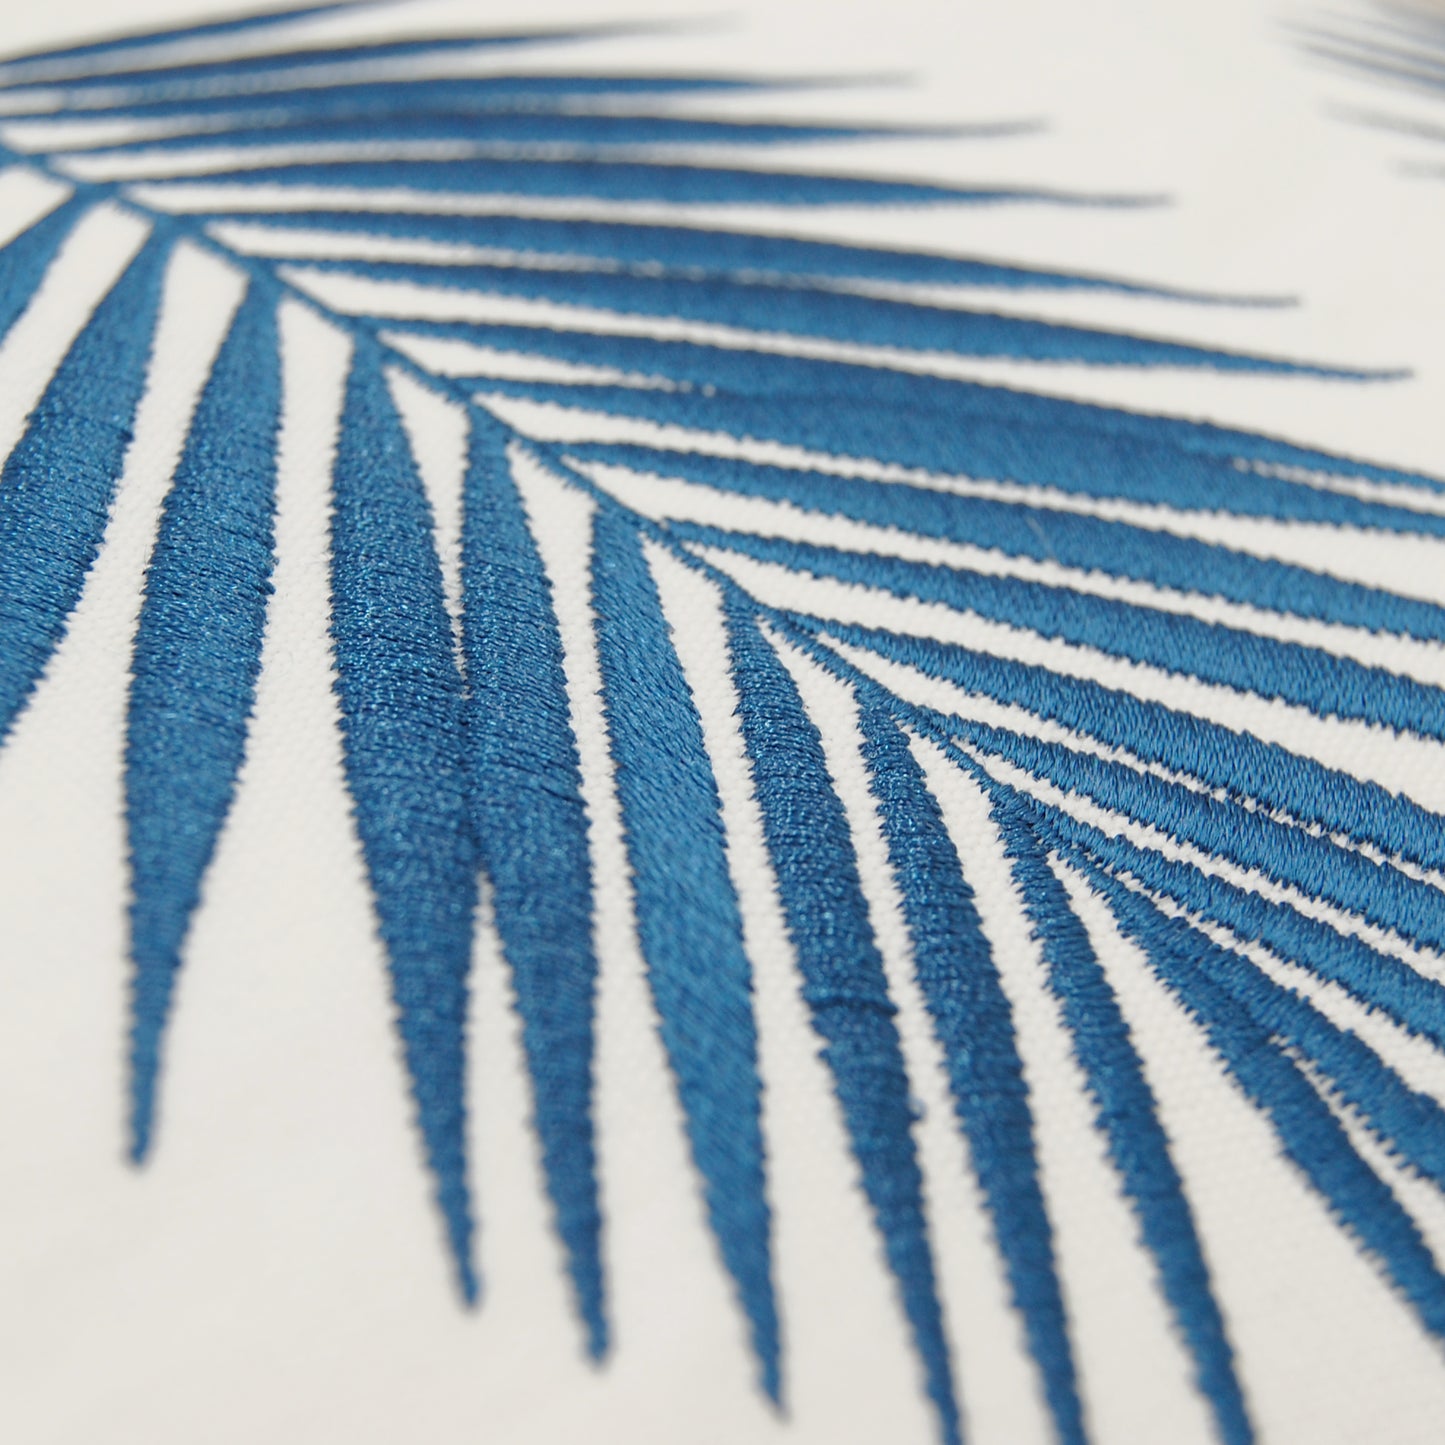 Detail shot of the Palm Pattern Lumbar Pillow's embroidery work.